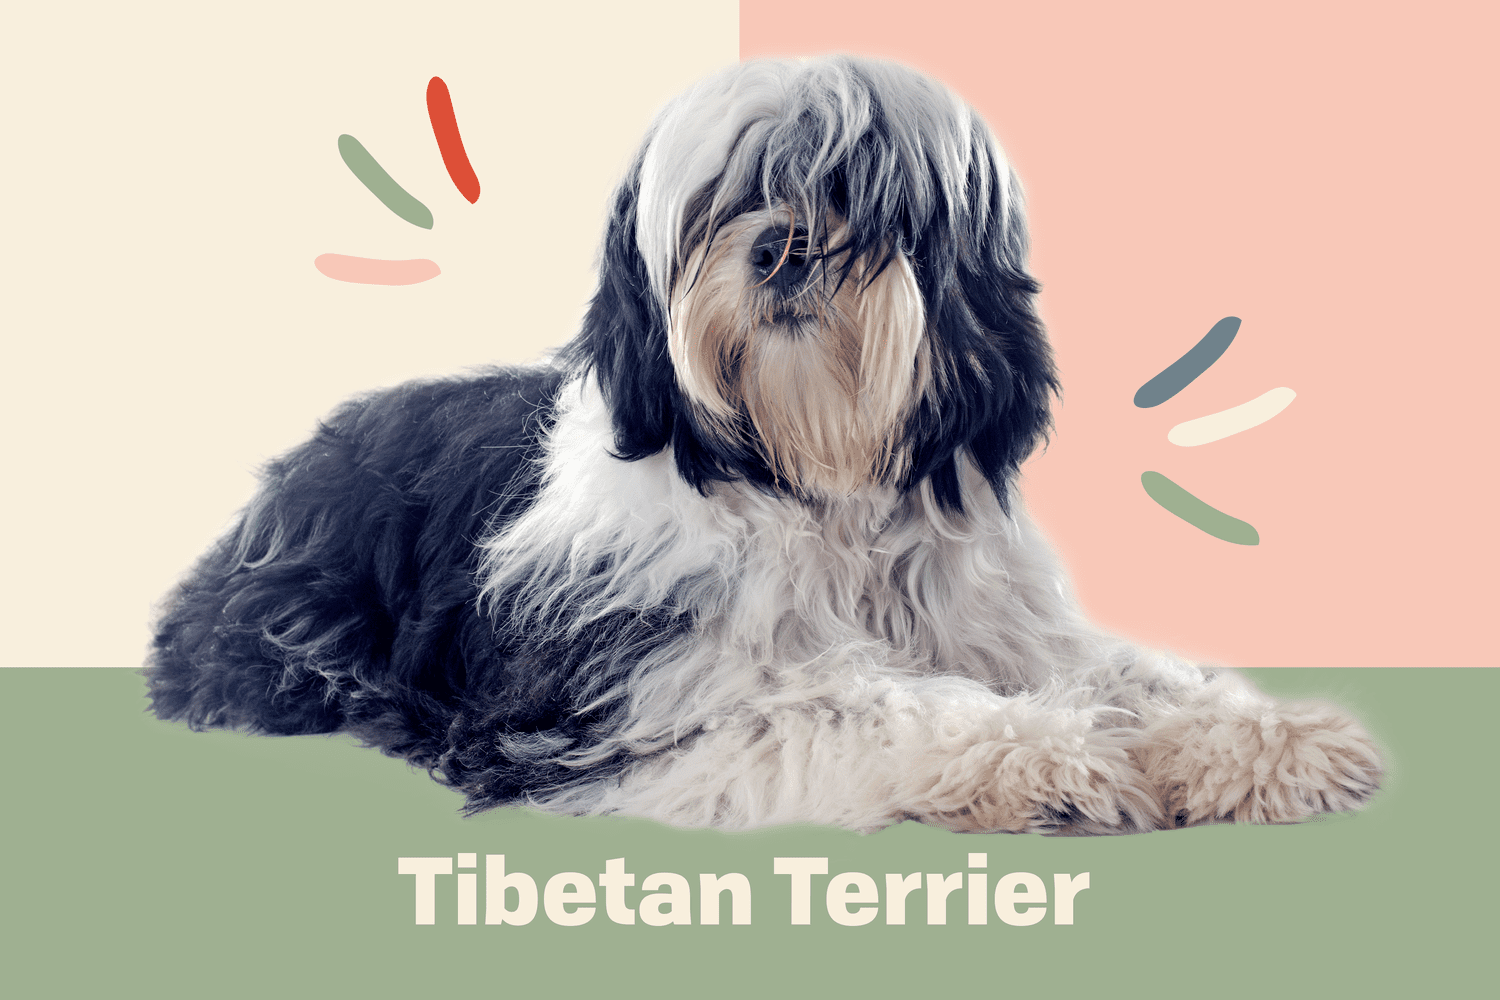 Tibetan Terrier Dog Breed Information and Characteristics | Daily Paws